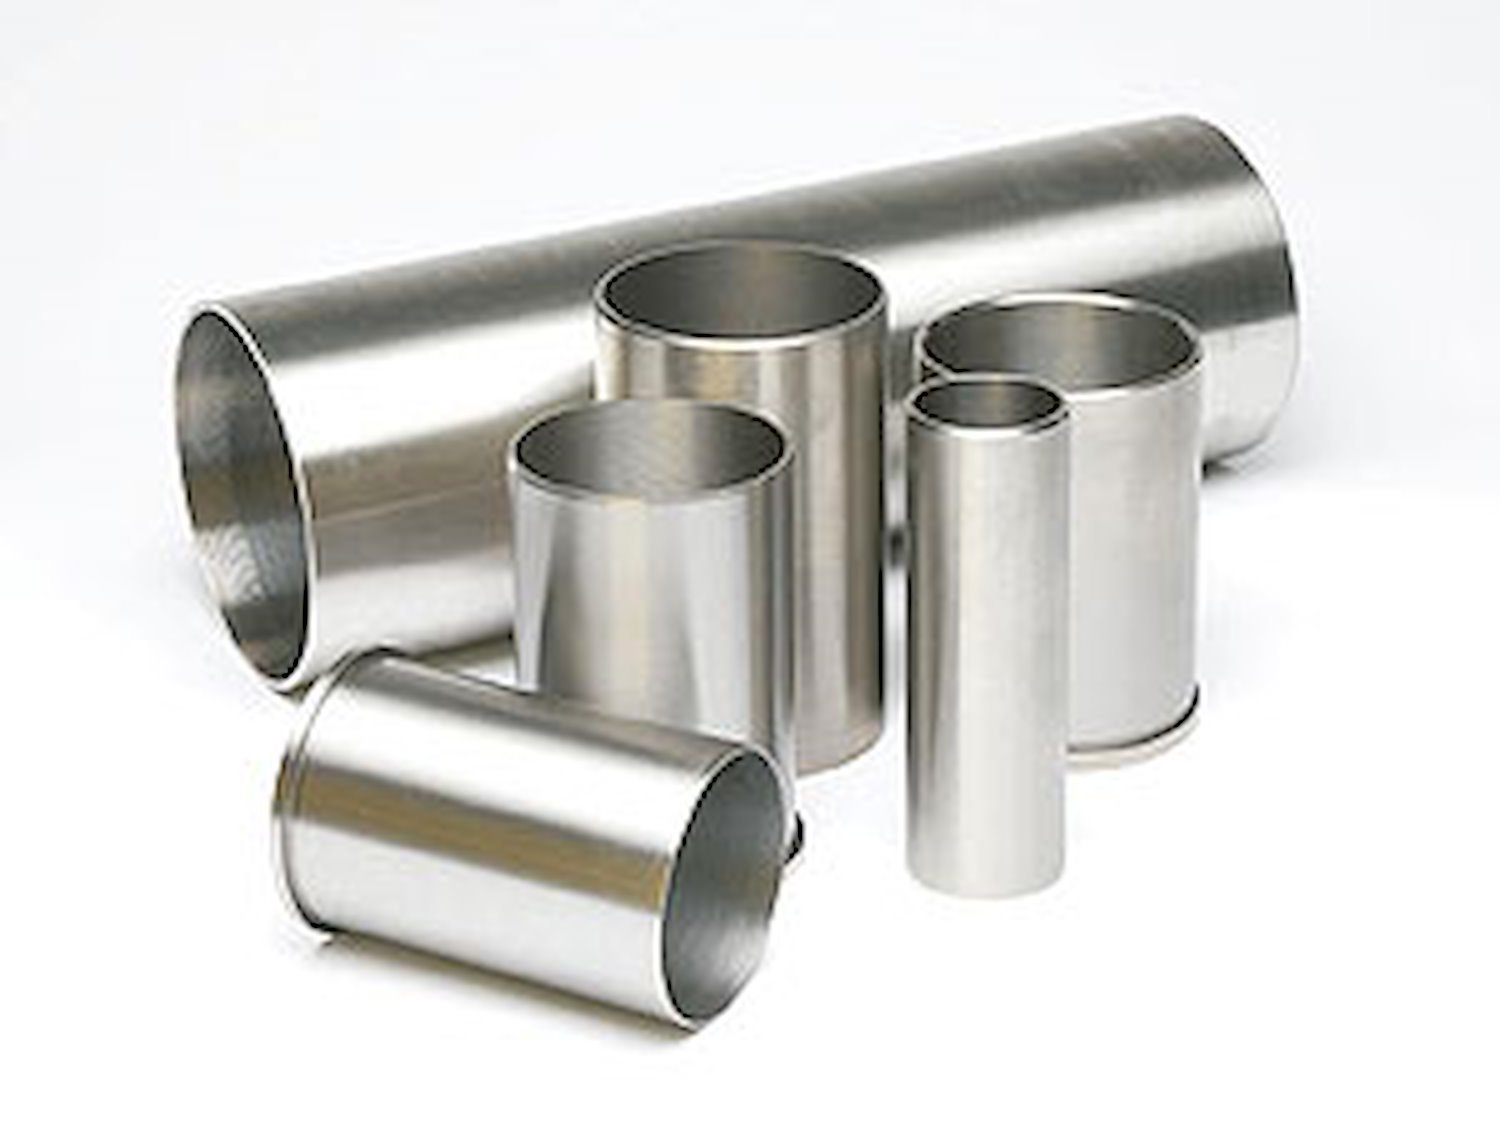 Cylinder Sleeve Bore: 3.0000" Length: 6-3/8" Wall Thickness: 1/8"